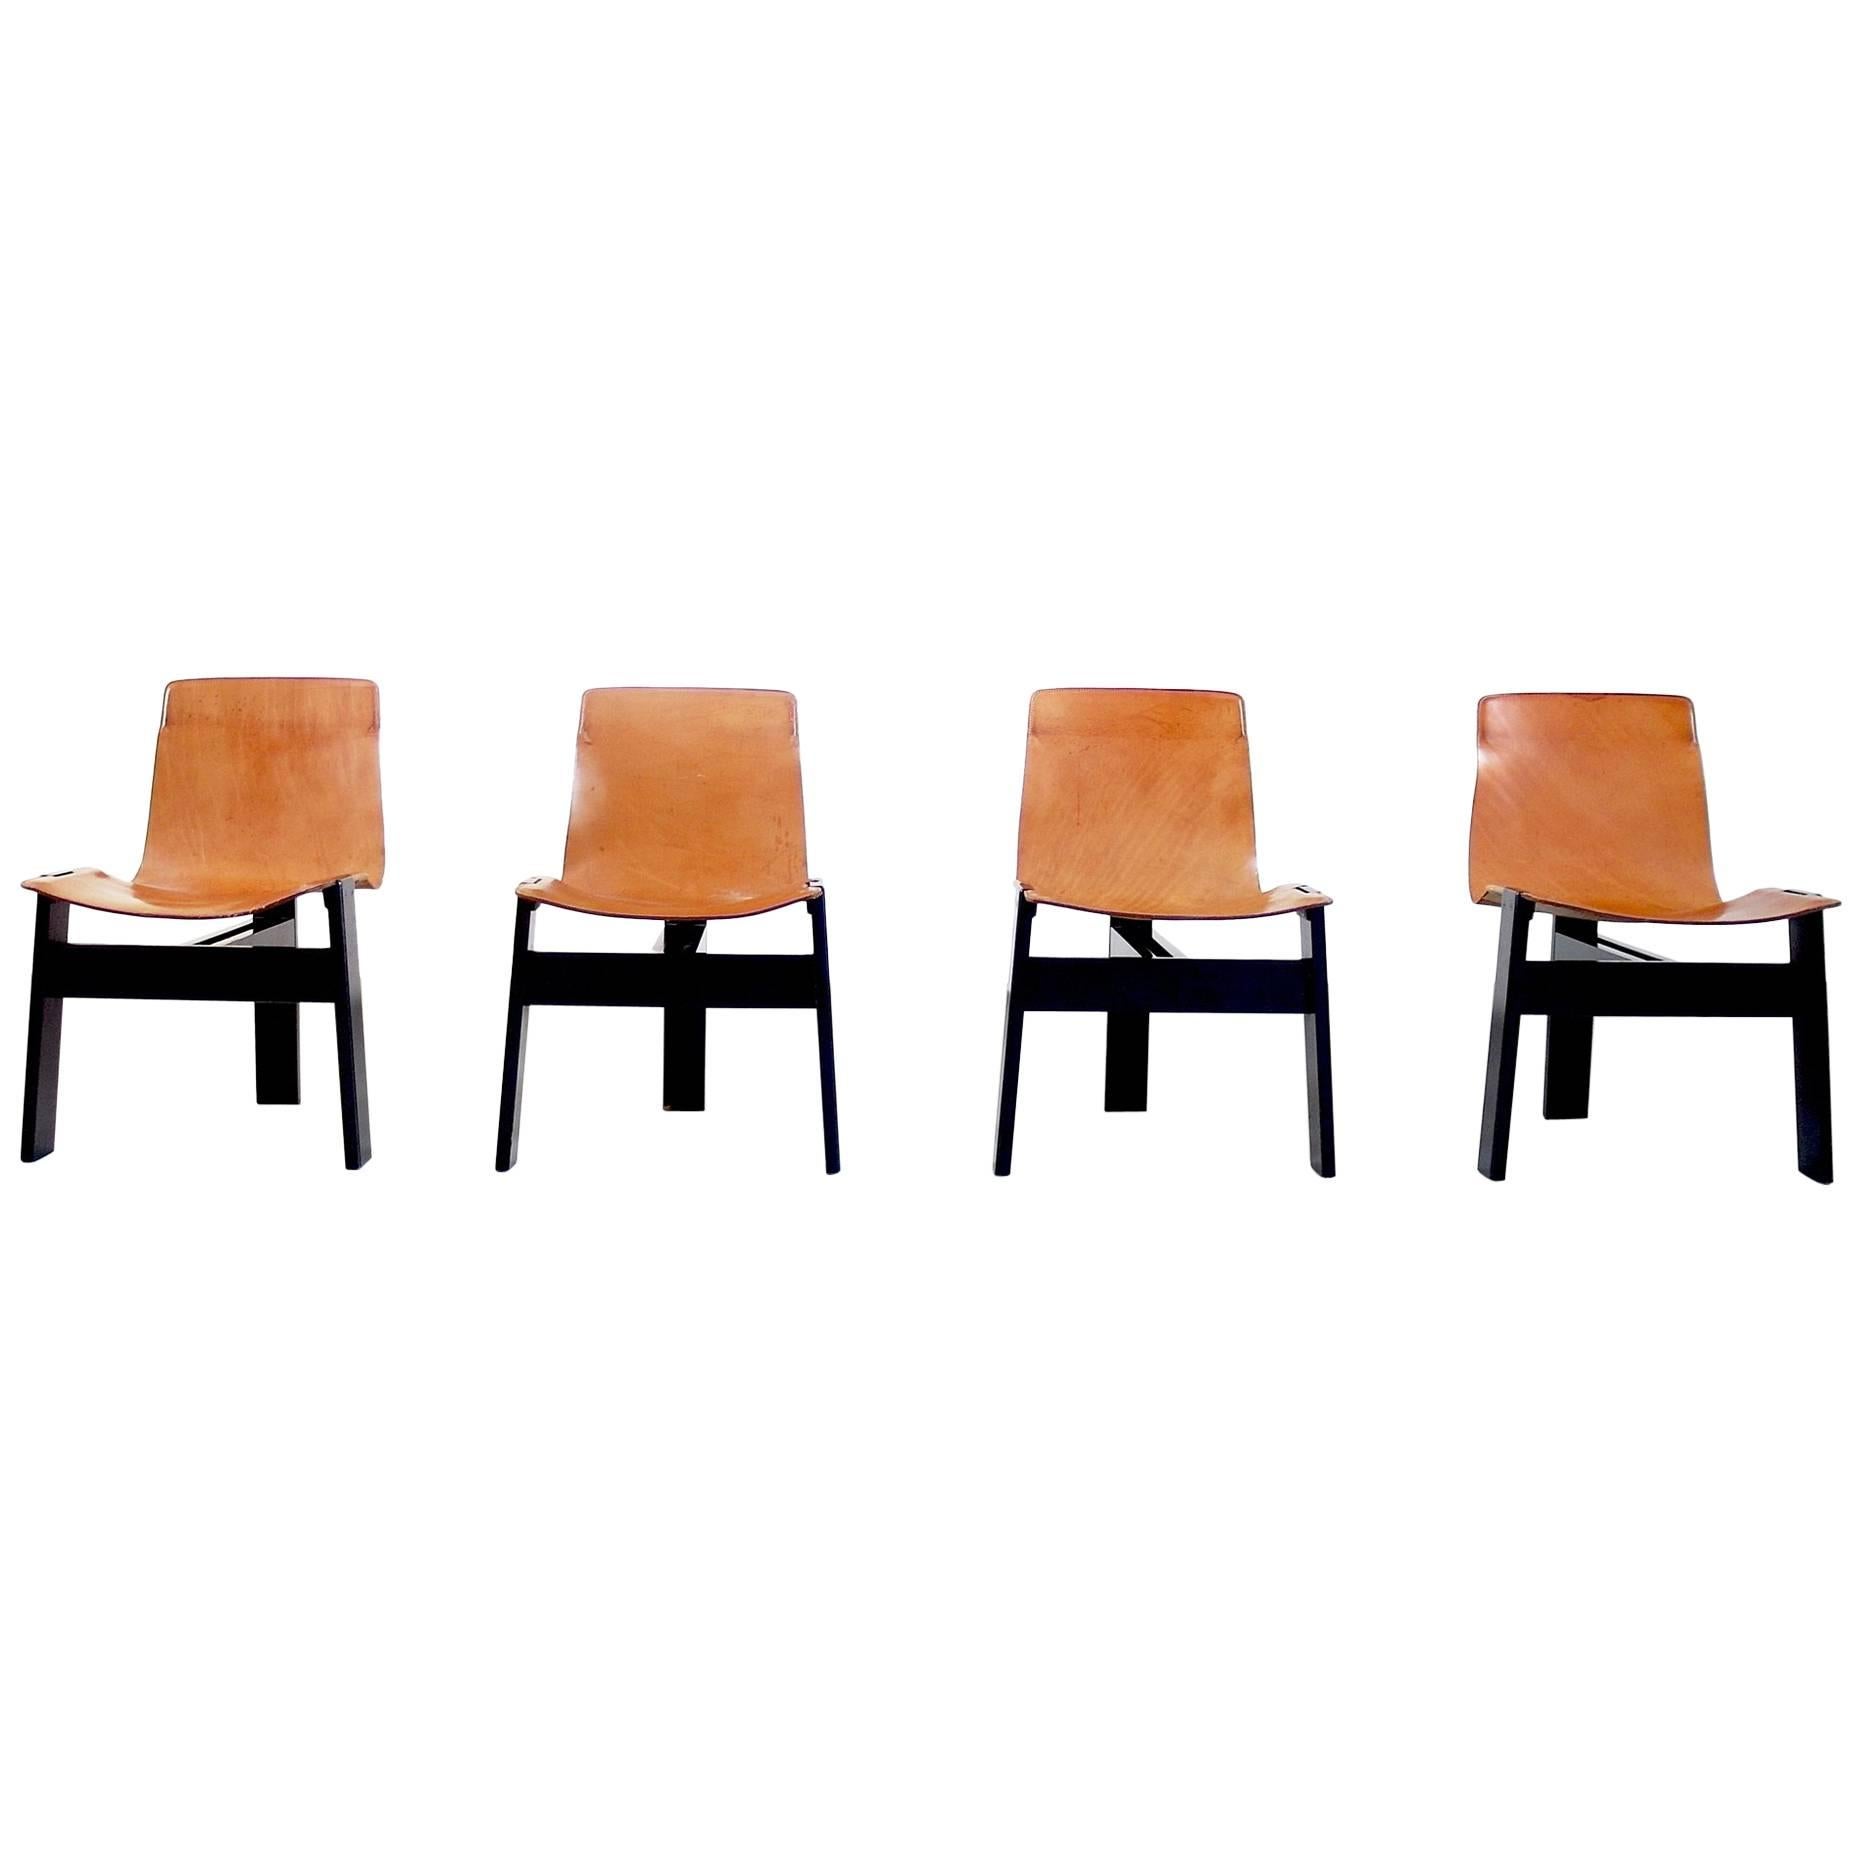 Angelo Mangiarotti Original Tre Three Dining Chairs in Cognac Leather, Italy